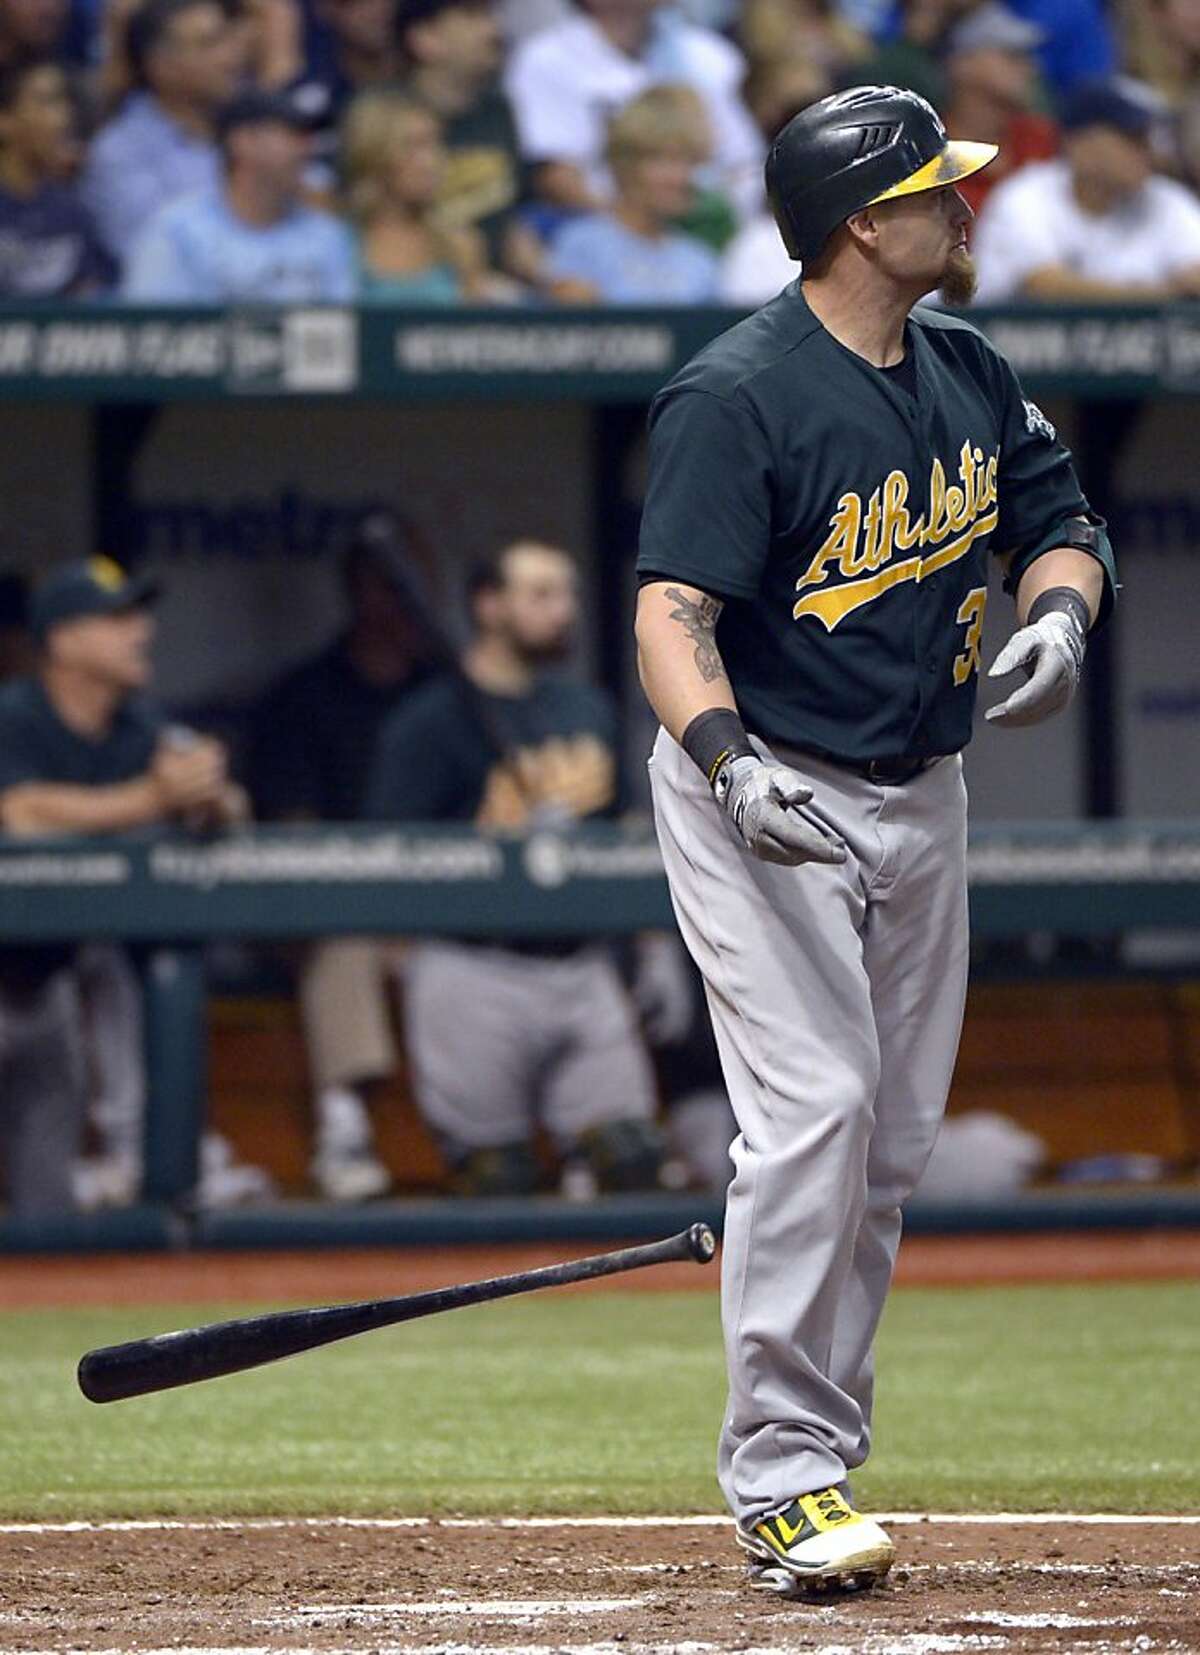 Oakland Athletics' Jonny Gomes watches his two-run home run during the eighth inning of a baseball game against the Tampa Bay Rays in St. Petersburg, Fla., Friday, Aug. 24, 2012. (AP Photo/Phelan M. Ebenhack)